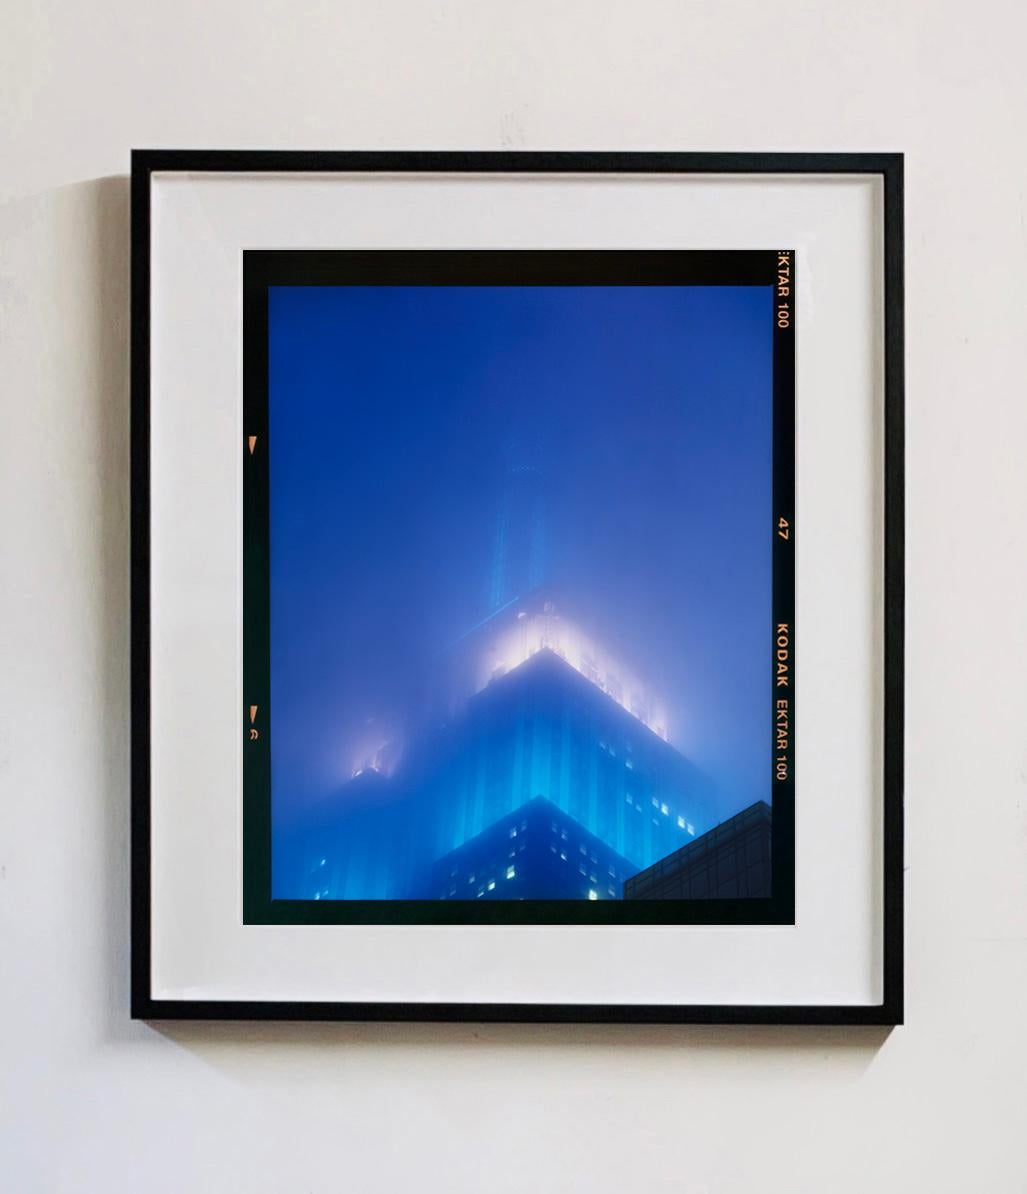 NOMAD II (Film Rebate), New York - Conceptual Architectural Color Photography - Print by Richard Heeps